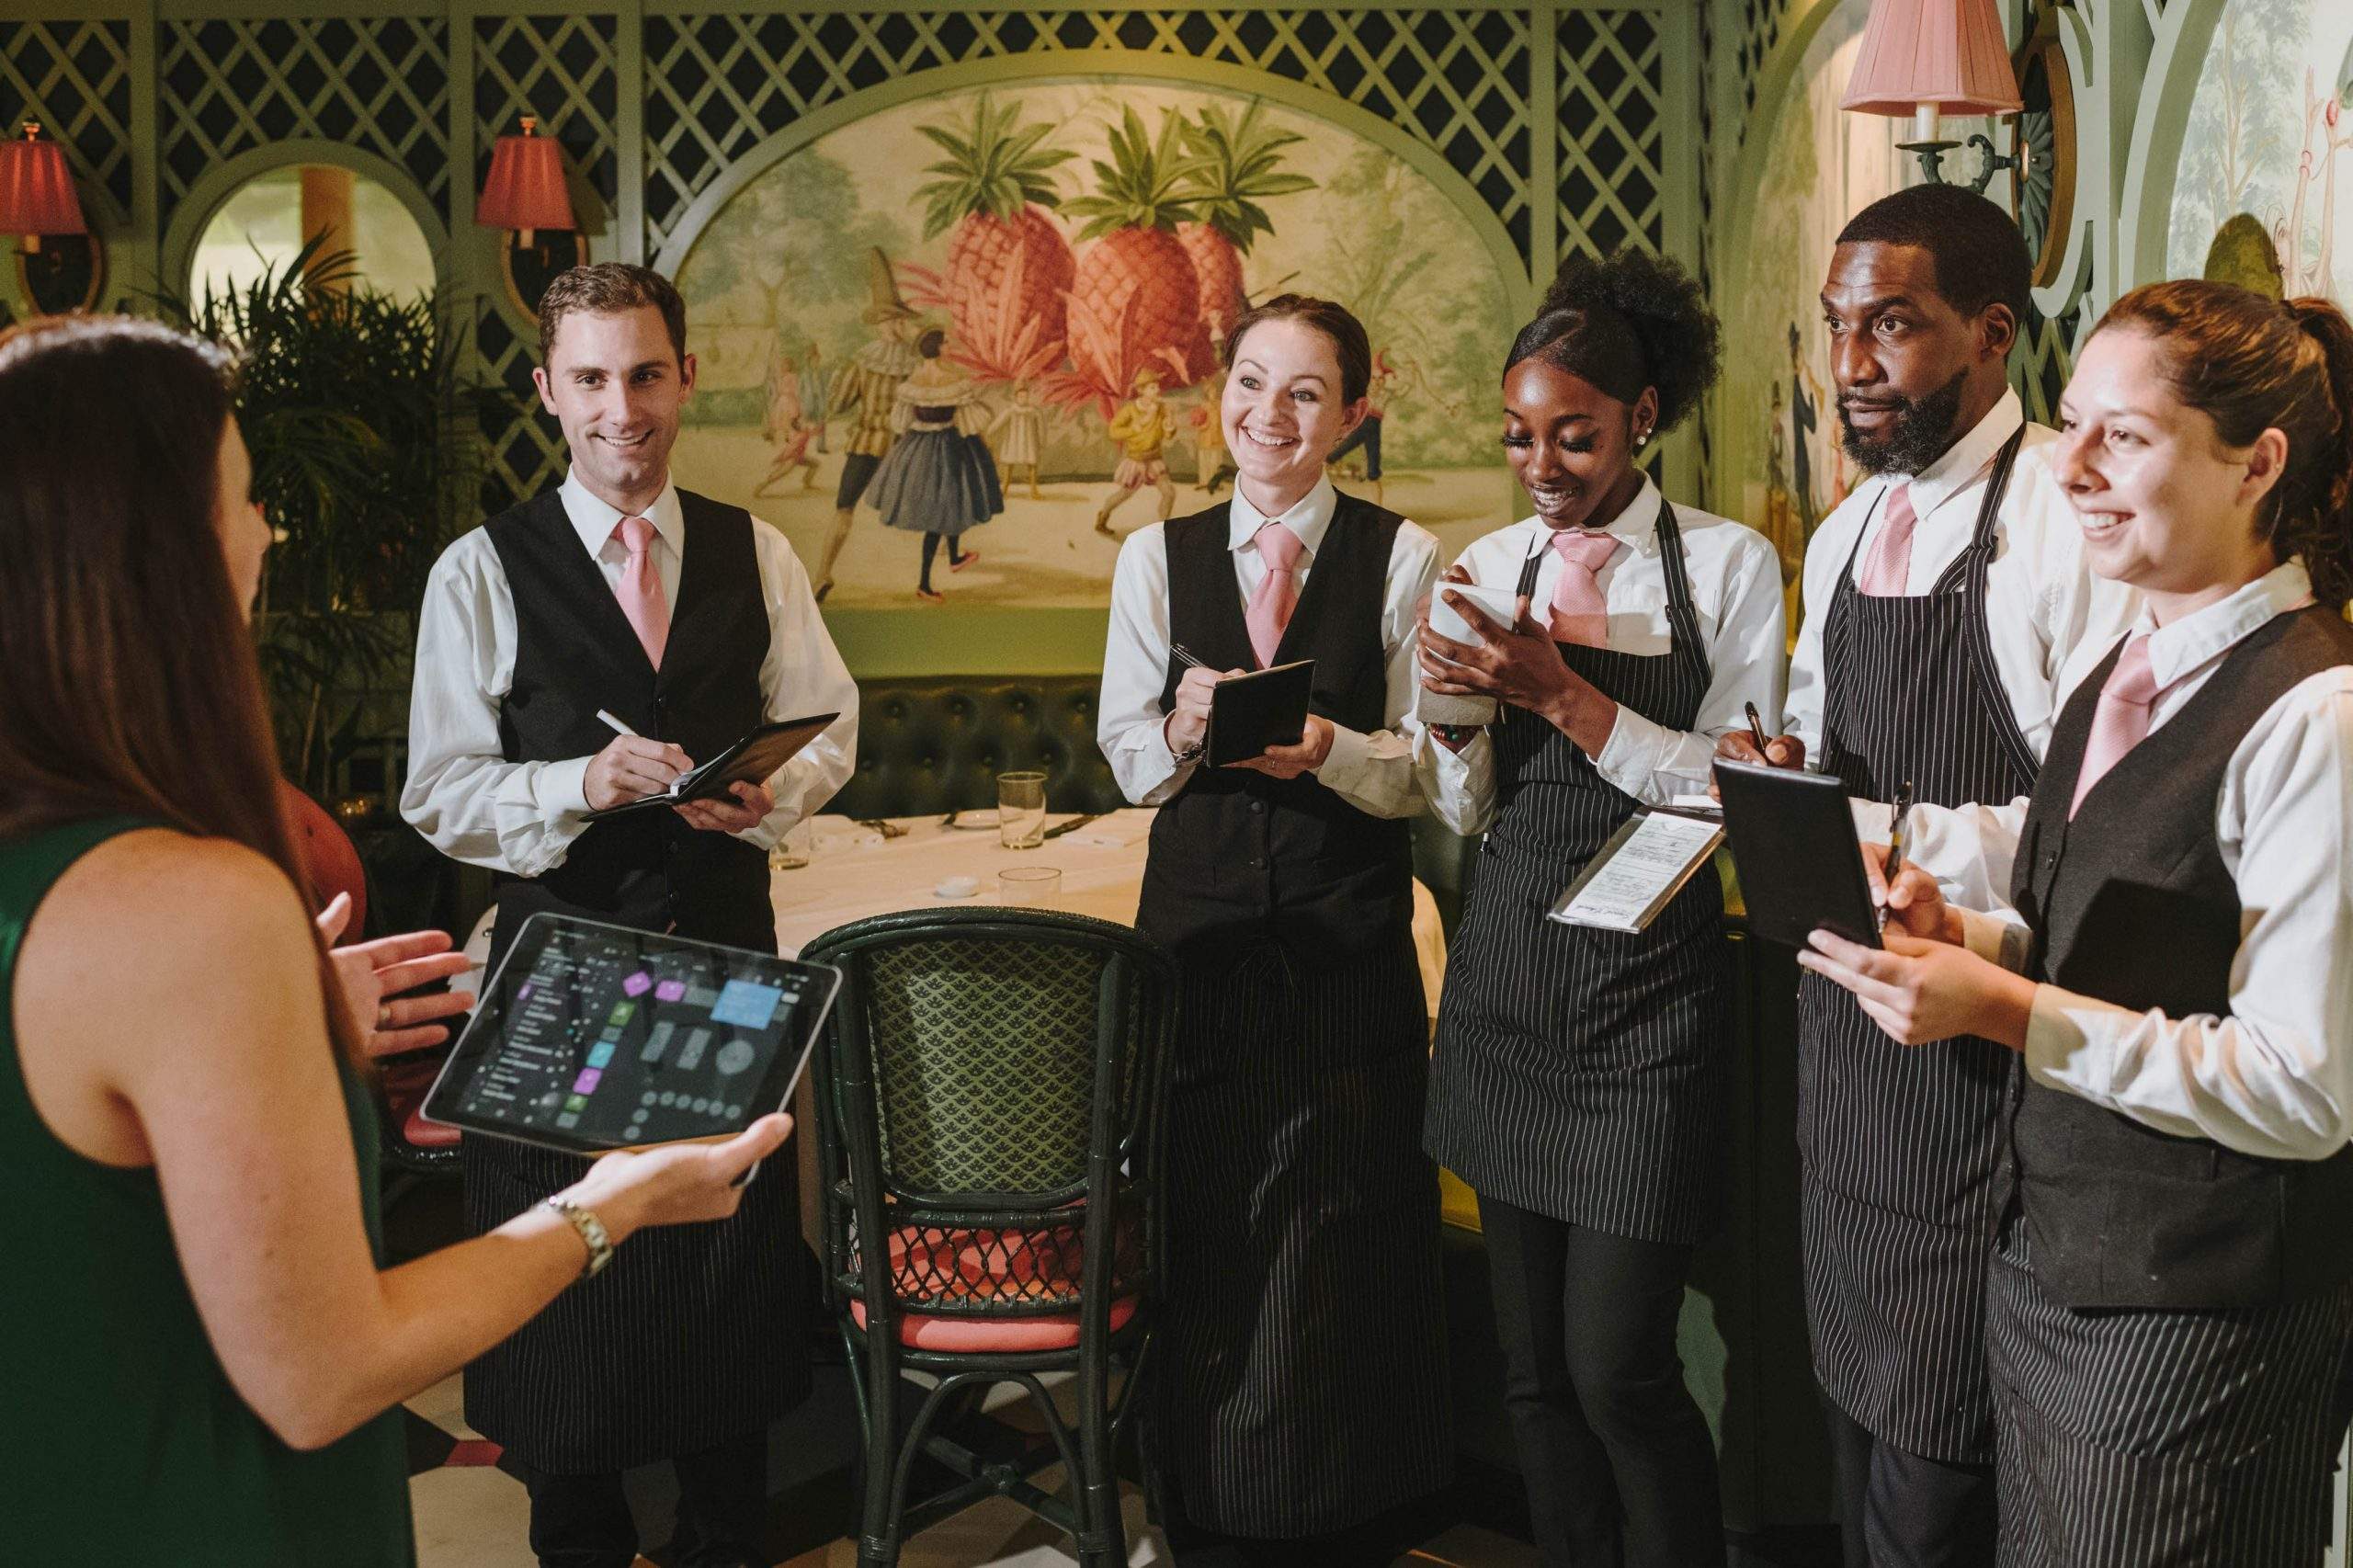 The image shows restaurant staff having a team briefing before the restaurant opening.